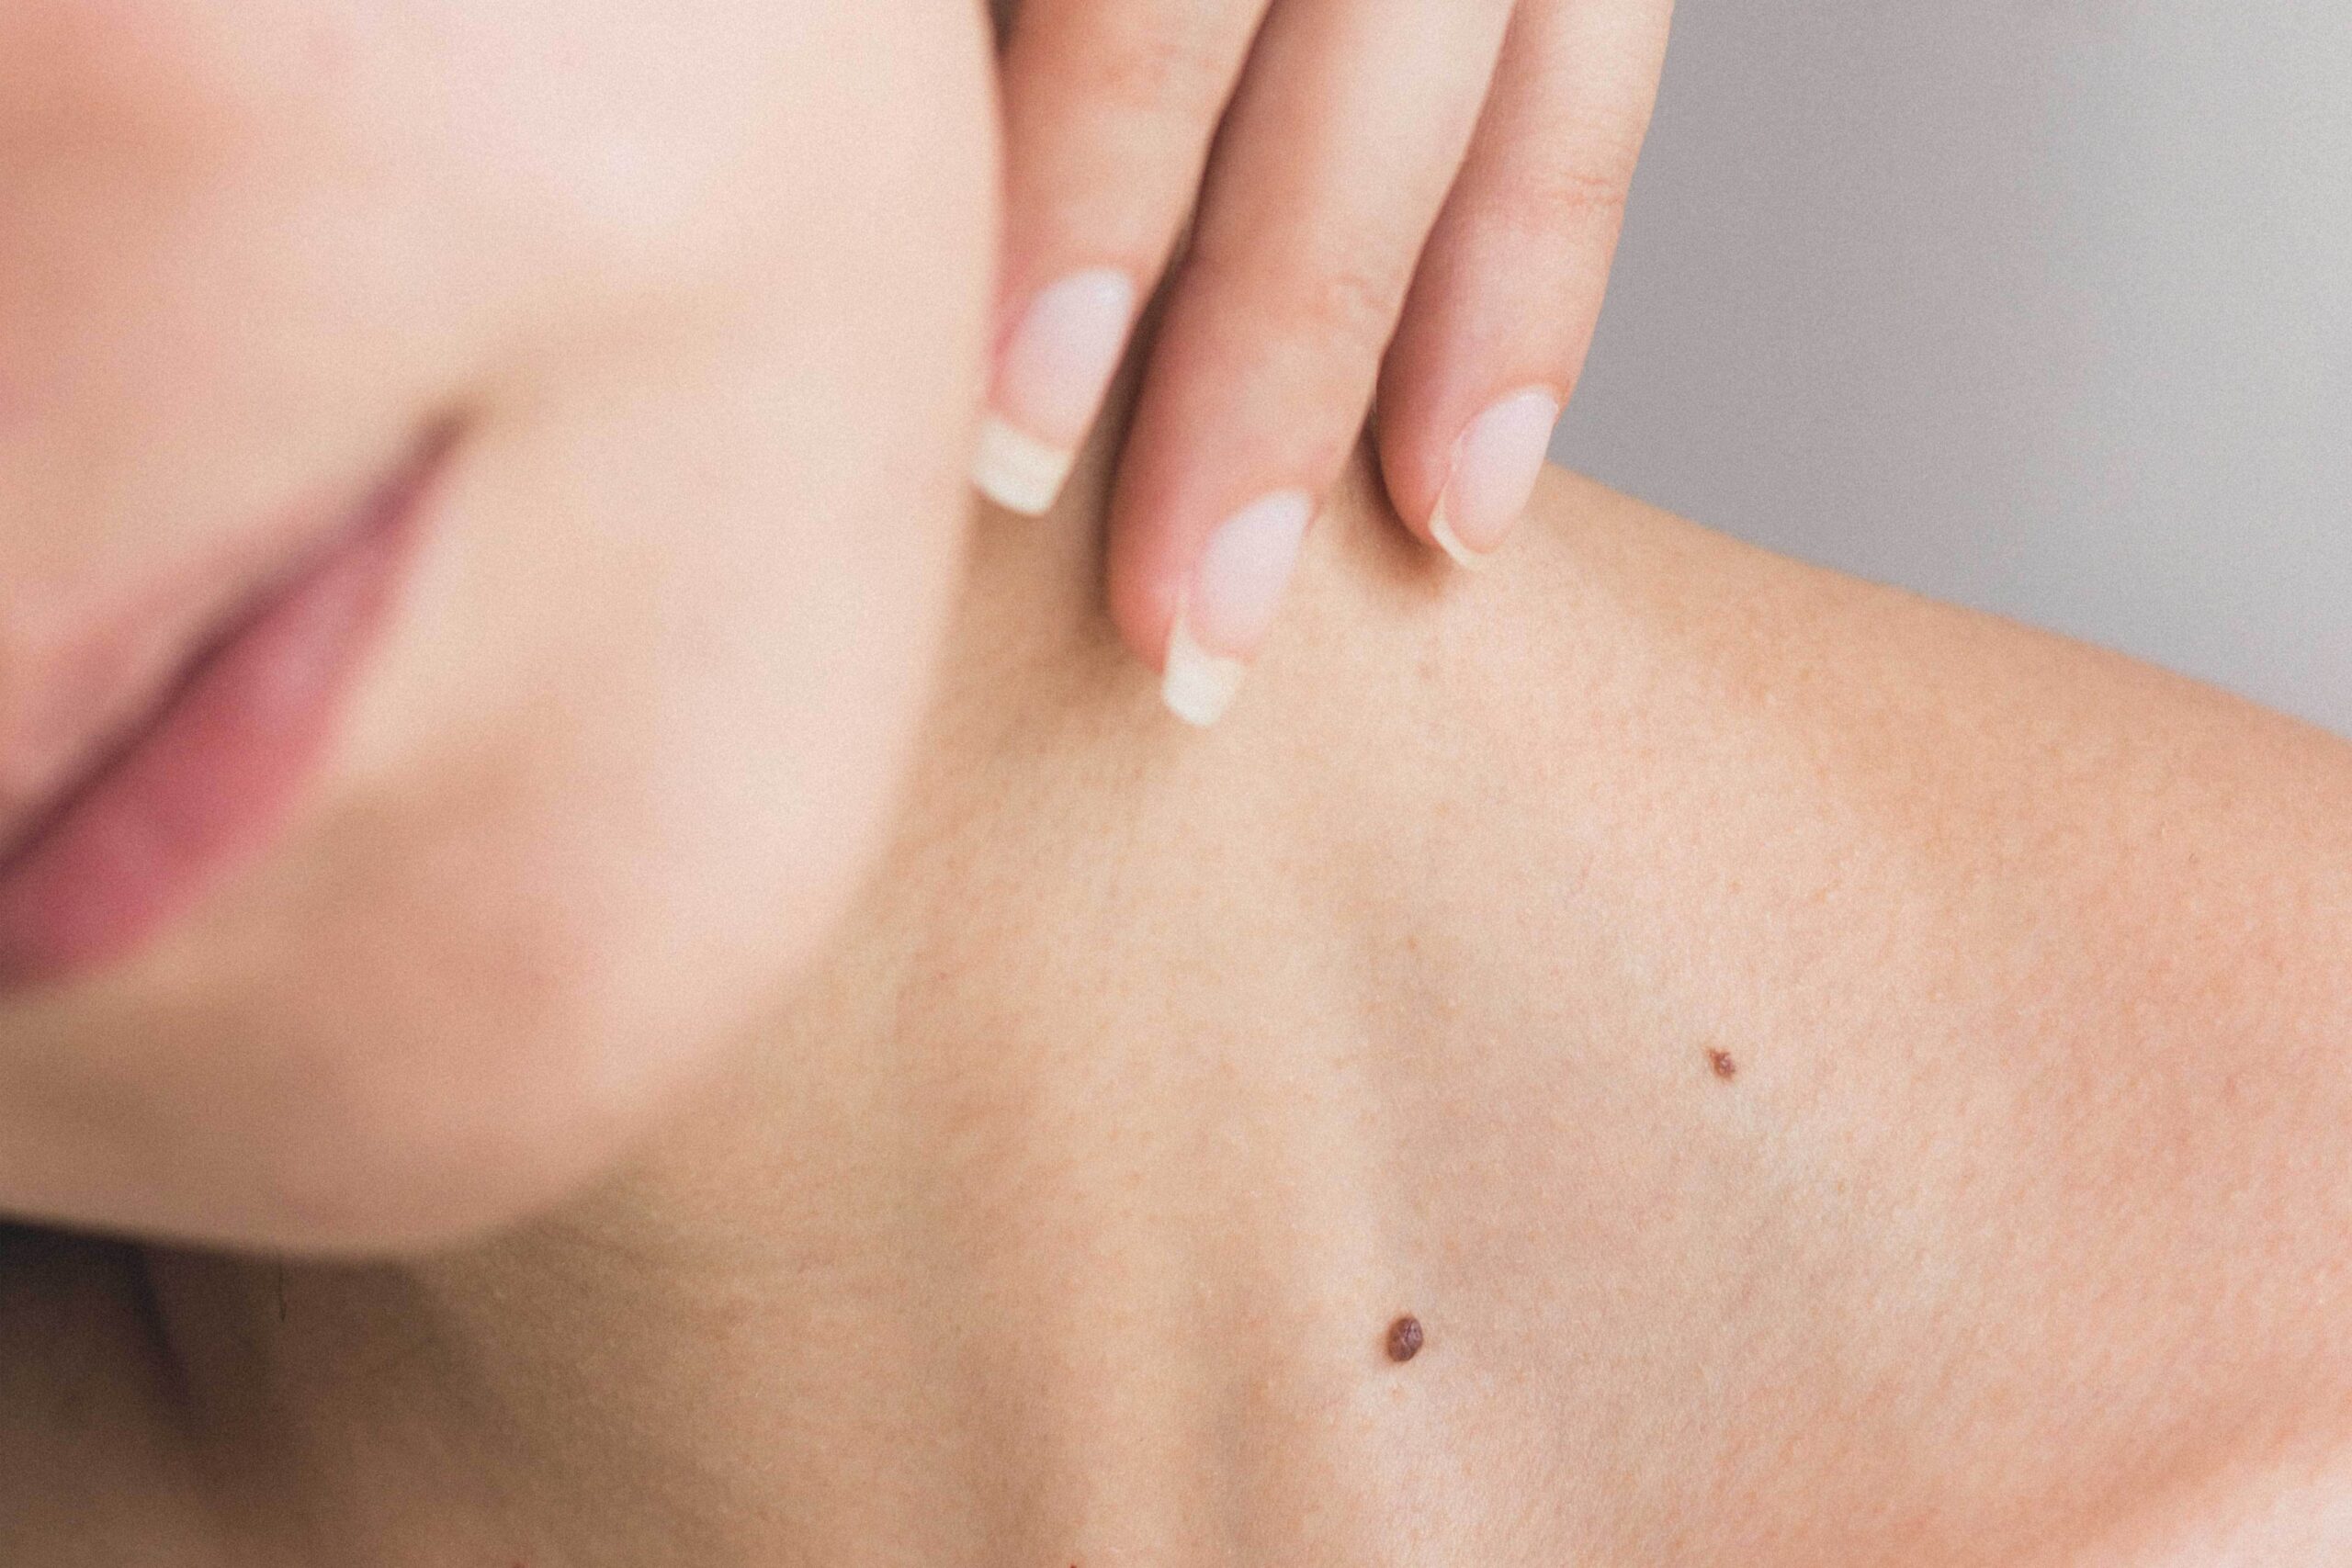 “I Have a New Mole”: Causes and When to See a Dermatologist